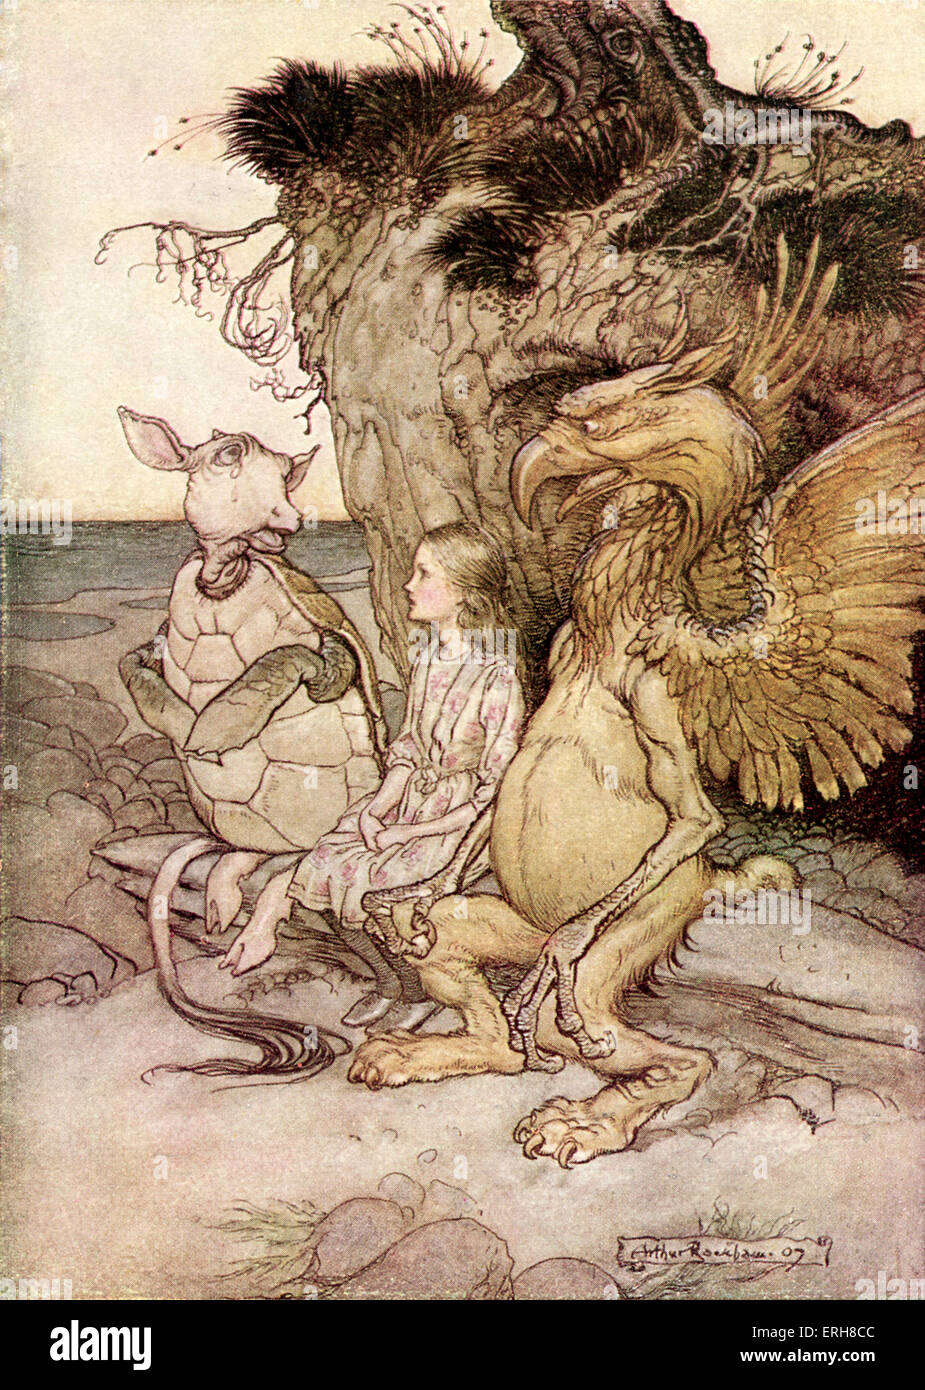 Alice 's Adventures in Wonderland by Lewis Carroll (Charles Lutwidge Dodgson). Caption reads:'The Mock Turtle drew a long breath and said 'That's very curious'' (Chapter 10). Illustration by Arthur Rackham. (First published 1865). LC: English children's writer and mathematician 27 January 1832- 14 January 1898. AR: 1867 -1939 (Real name Reverend Charles Lutwidge Dodgson) English author: 27 January 1832 - 14 January 1898. Stock Photo